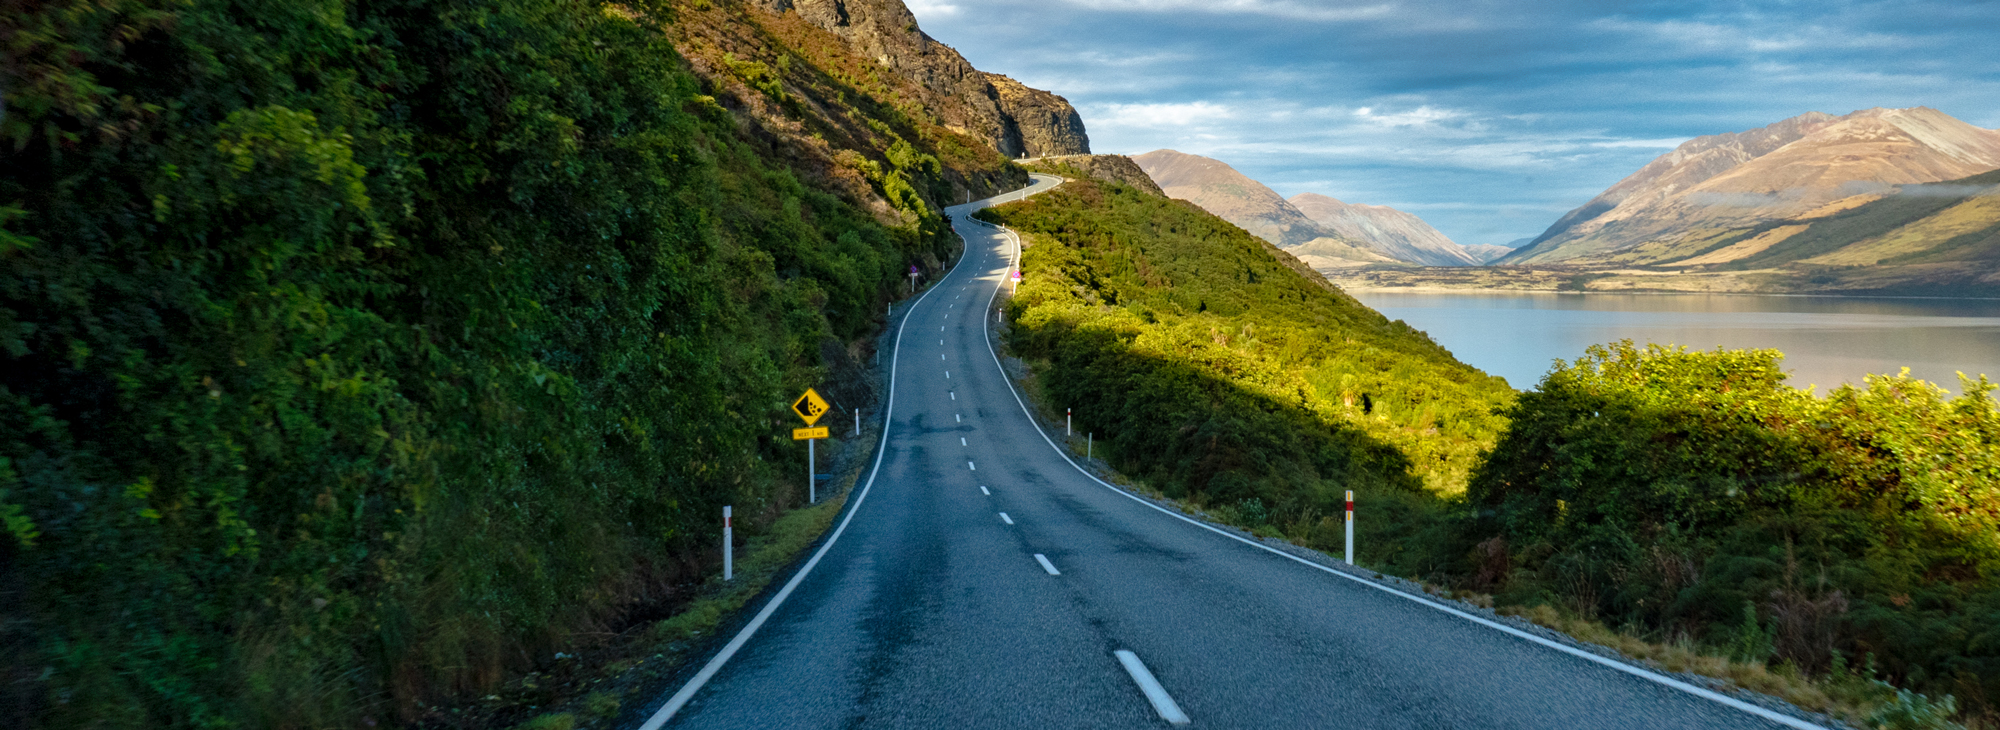 Planning a road trip in NZ? Make sure you're prepared